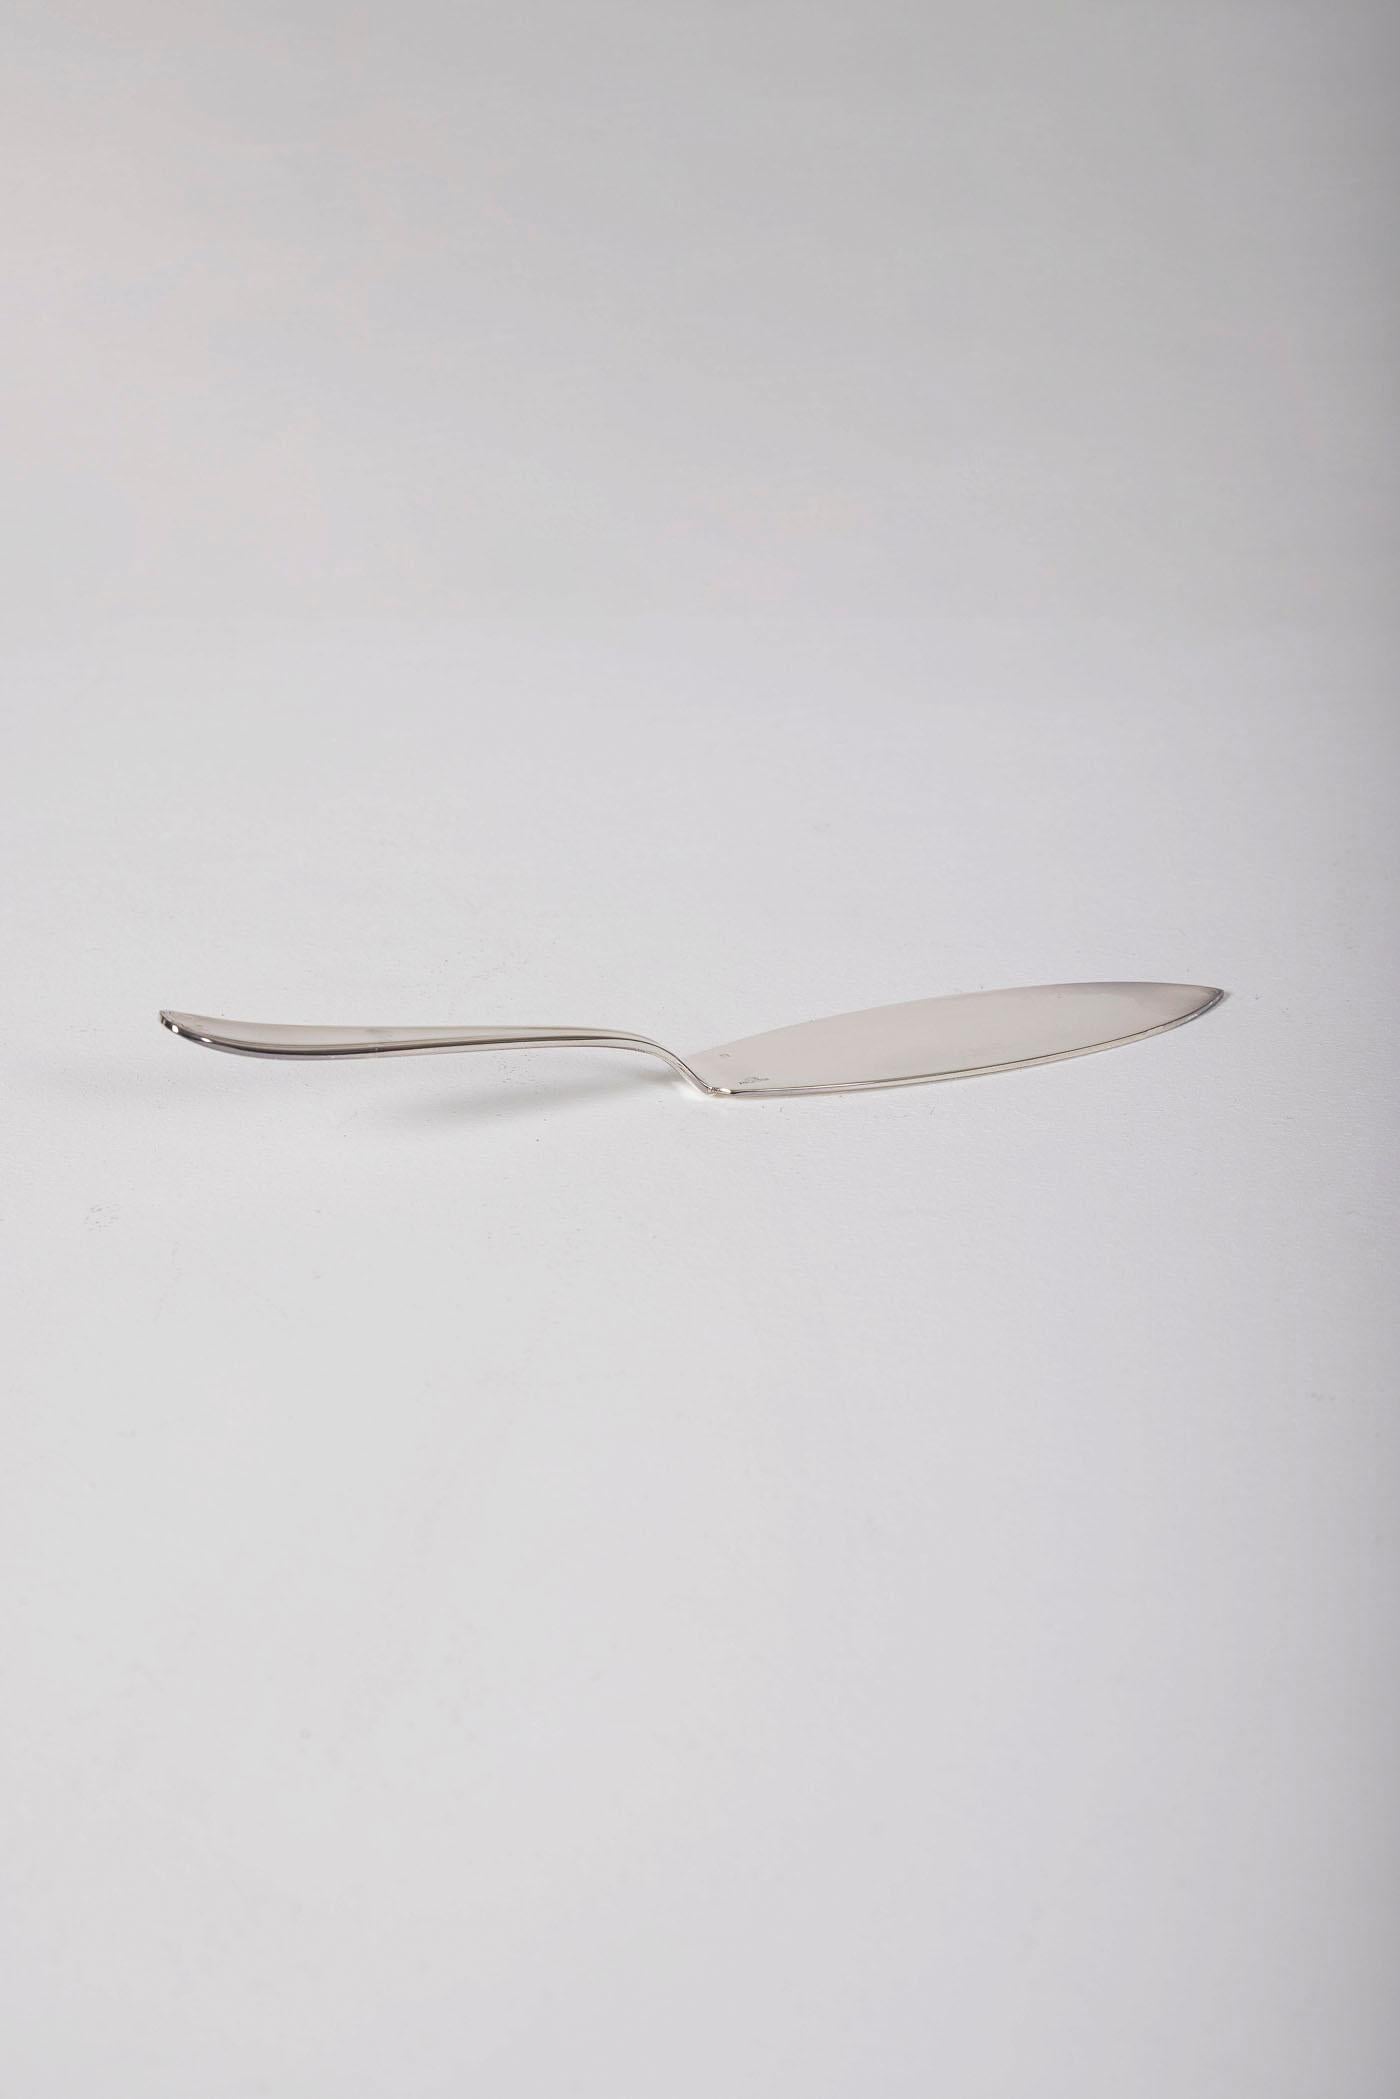 Christofle Cake Server In Good Condition For Sale In PARIS, FR